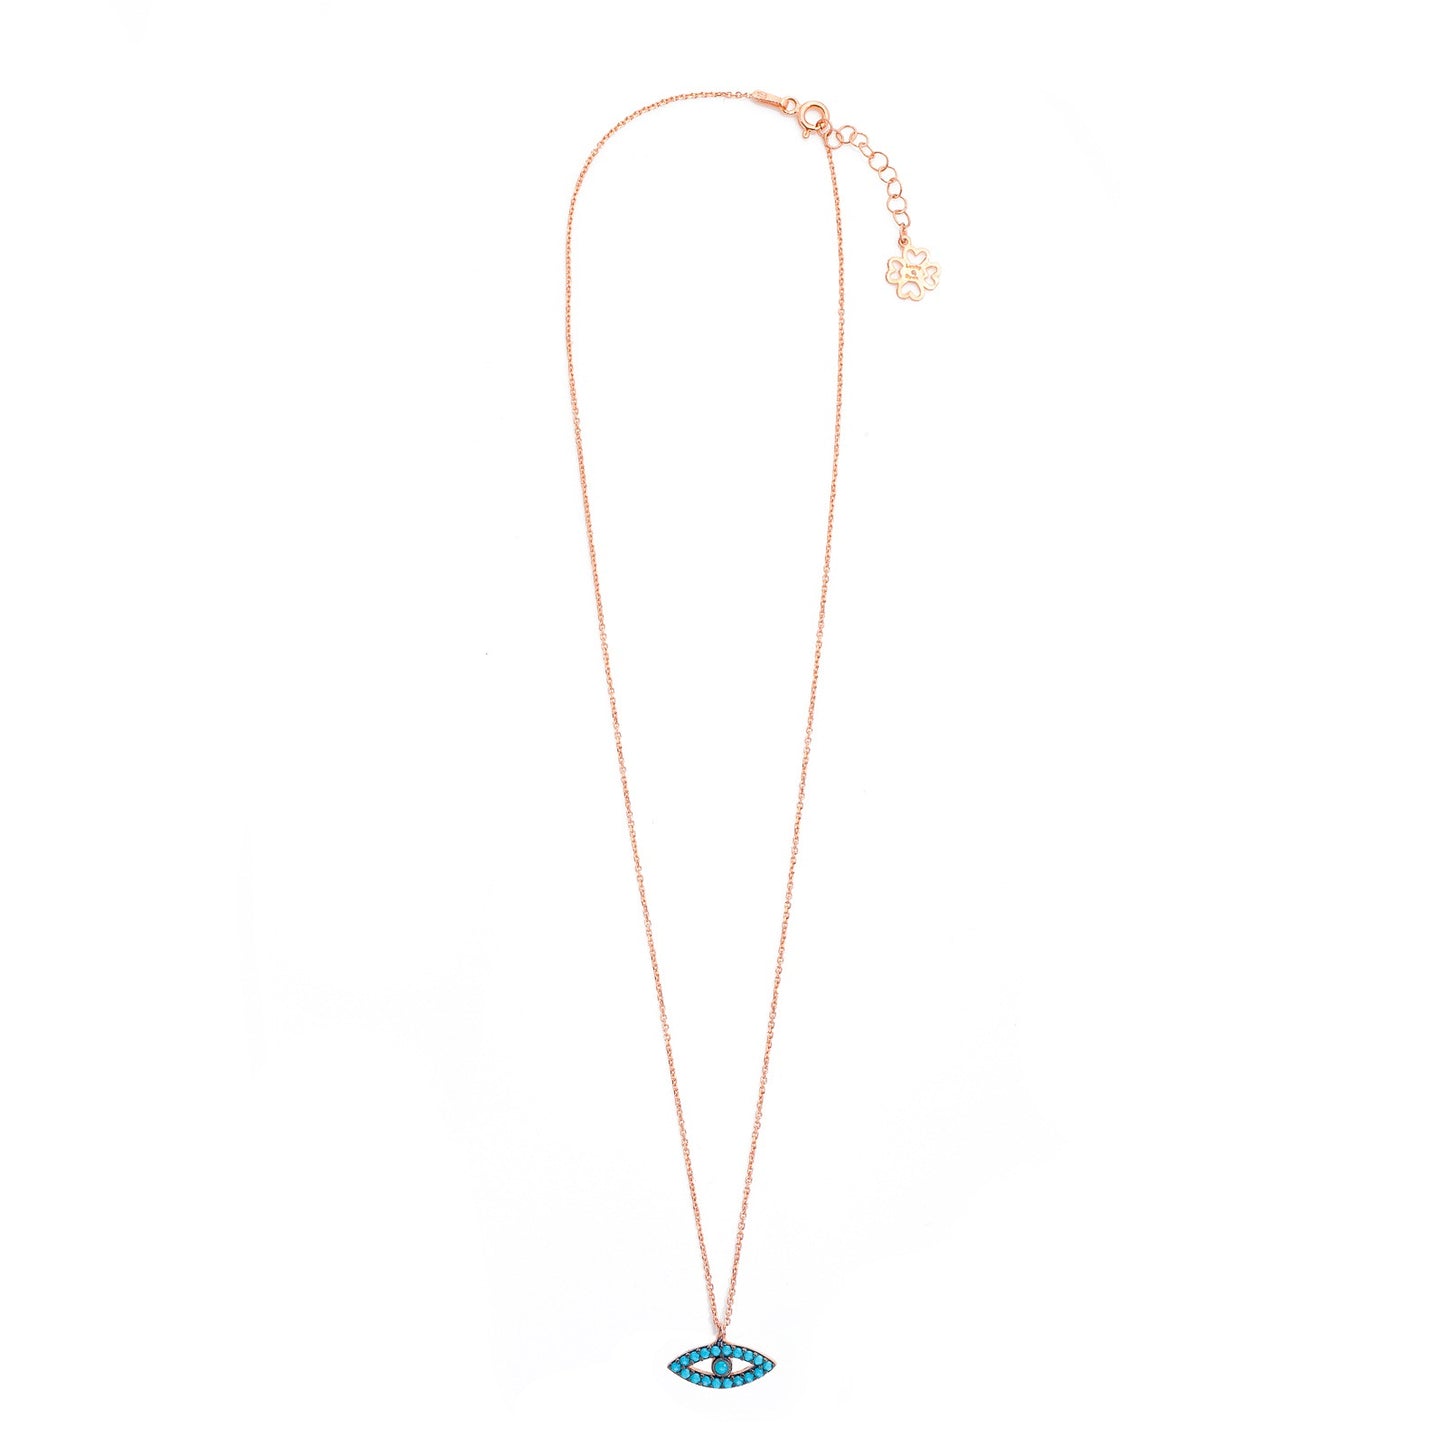 Turquoise Eye Necklace - 'Ibiza Vibes' Collection